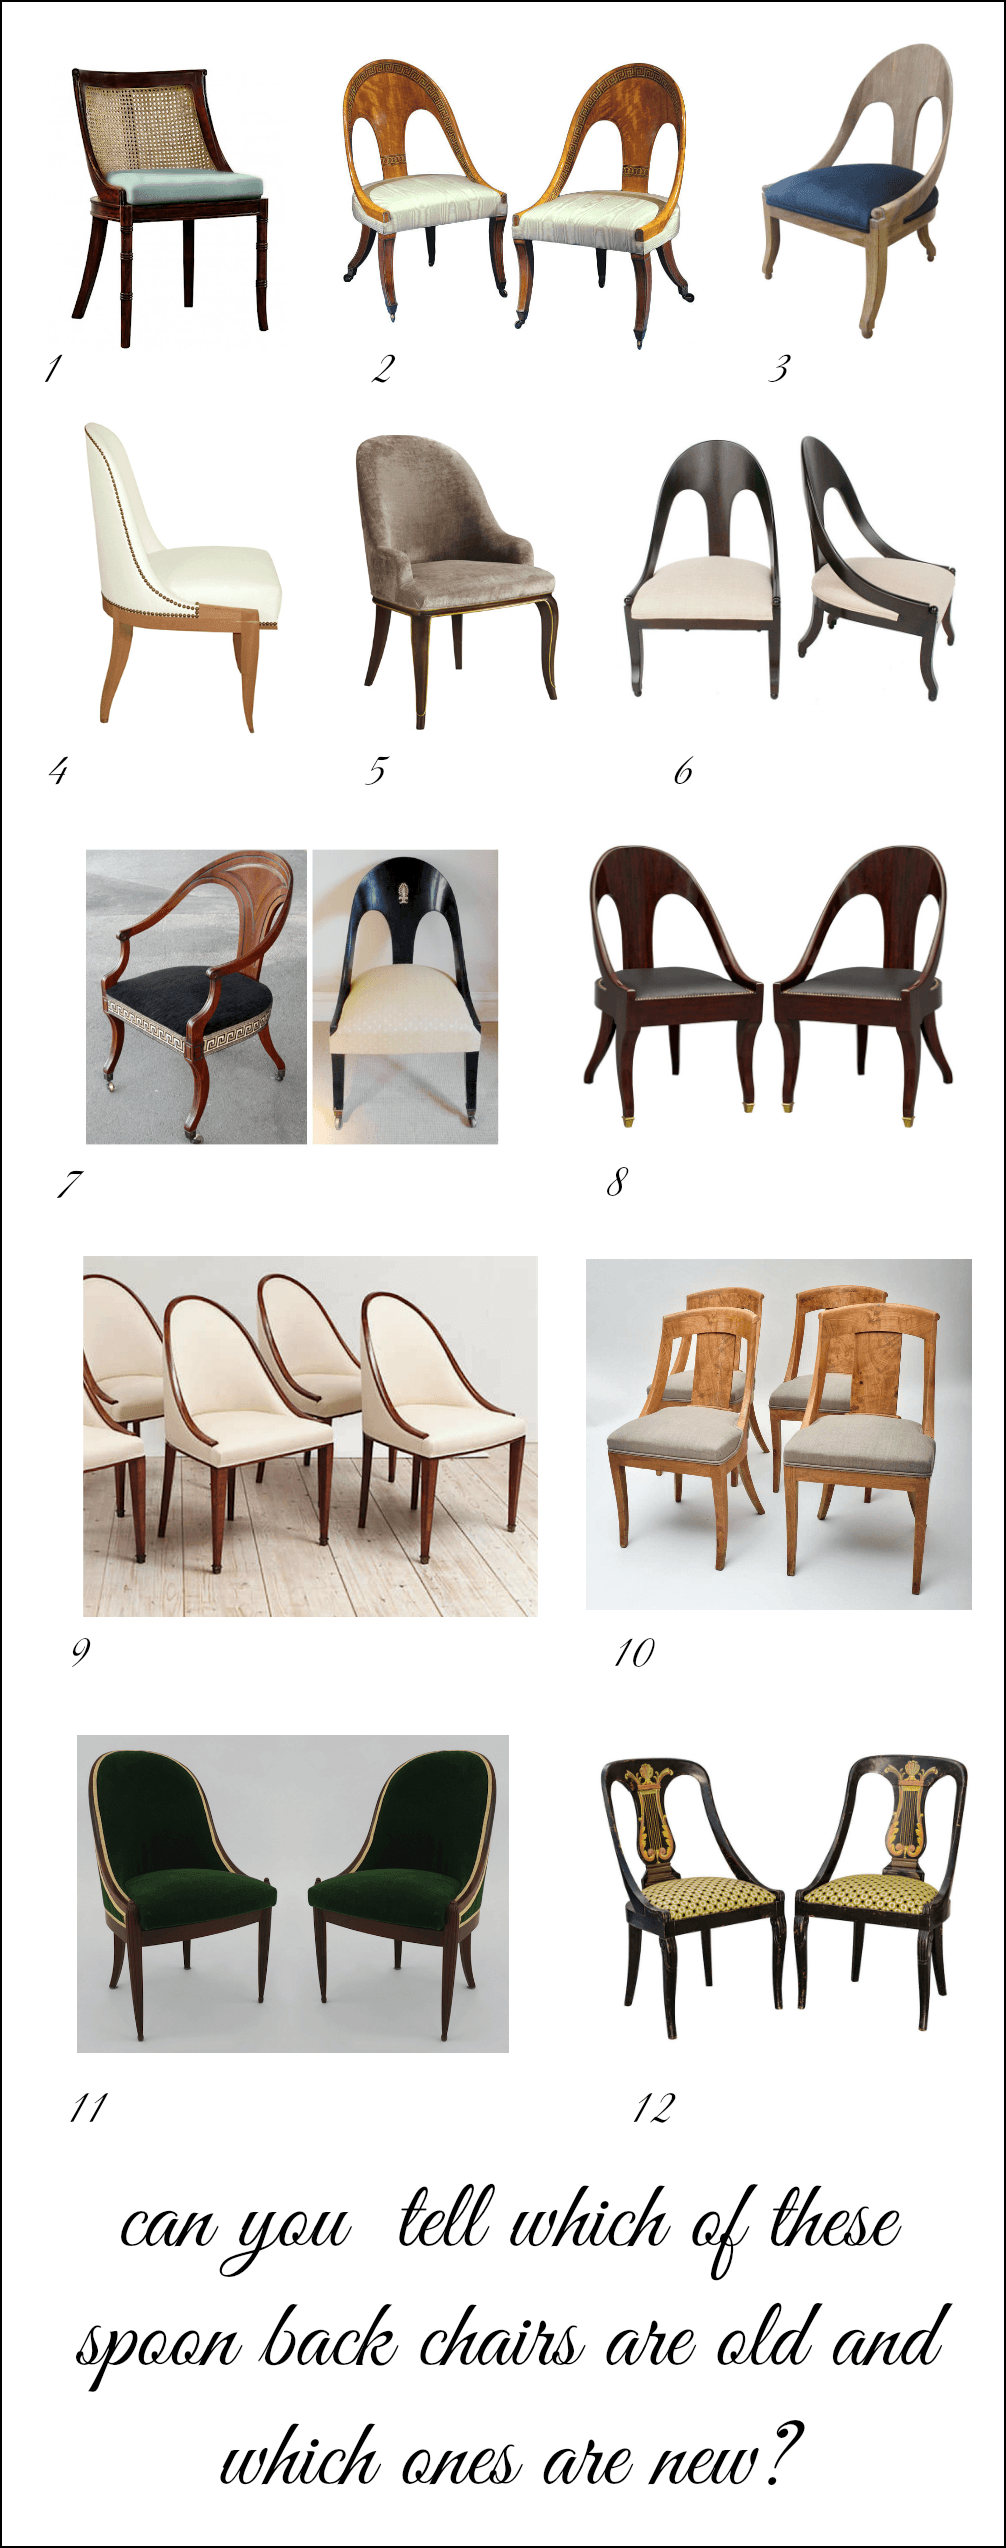 spoonback chairs